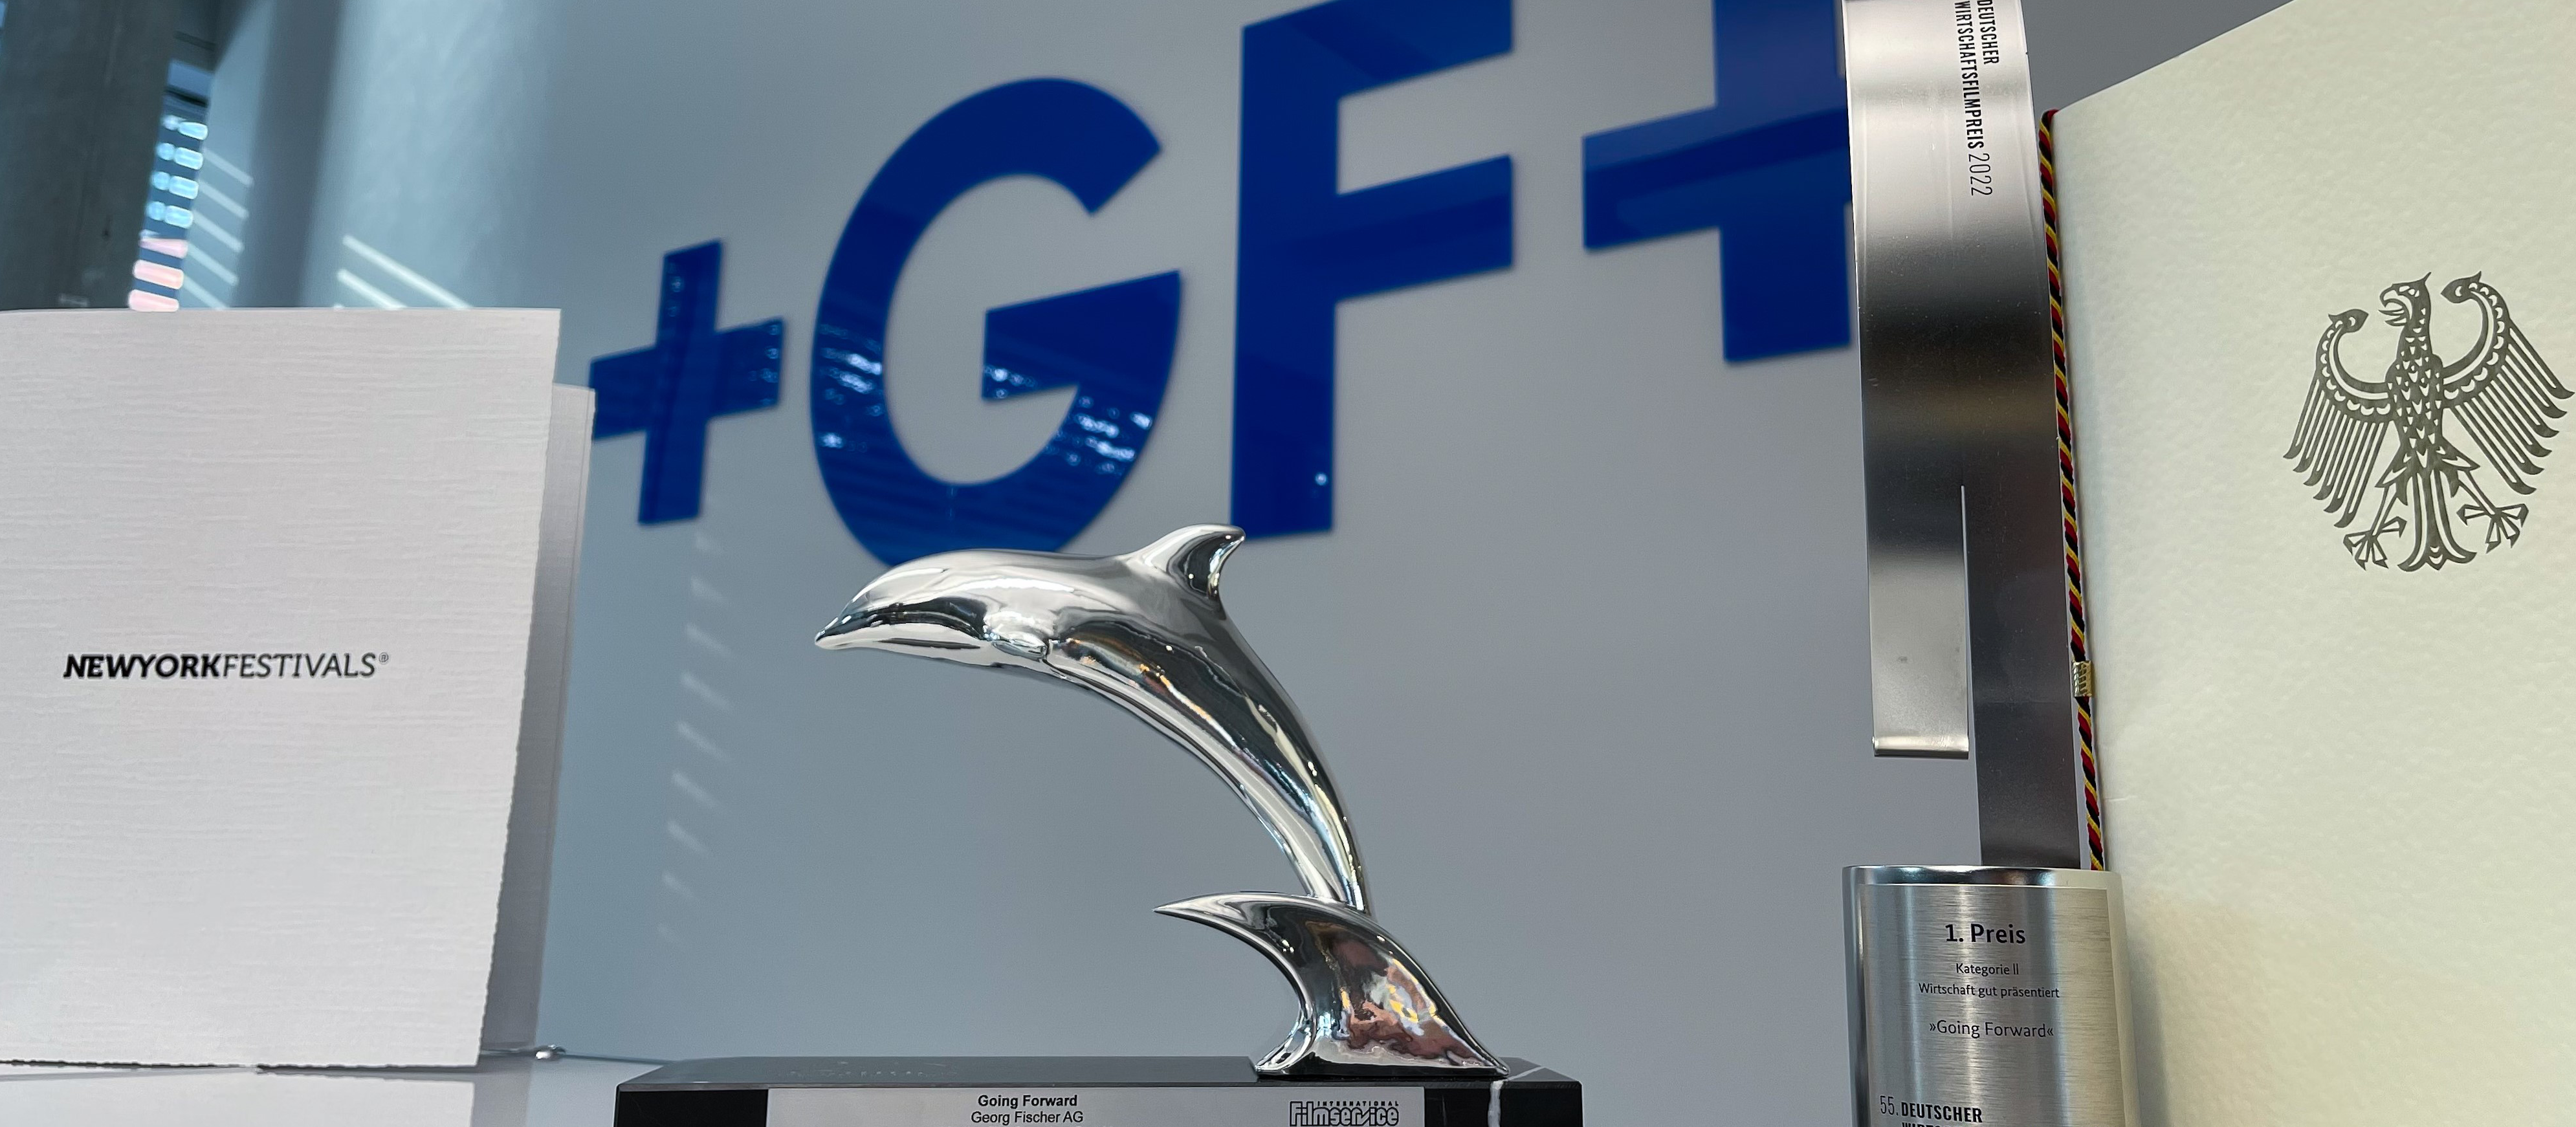 GF wins awards for its image movie